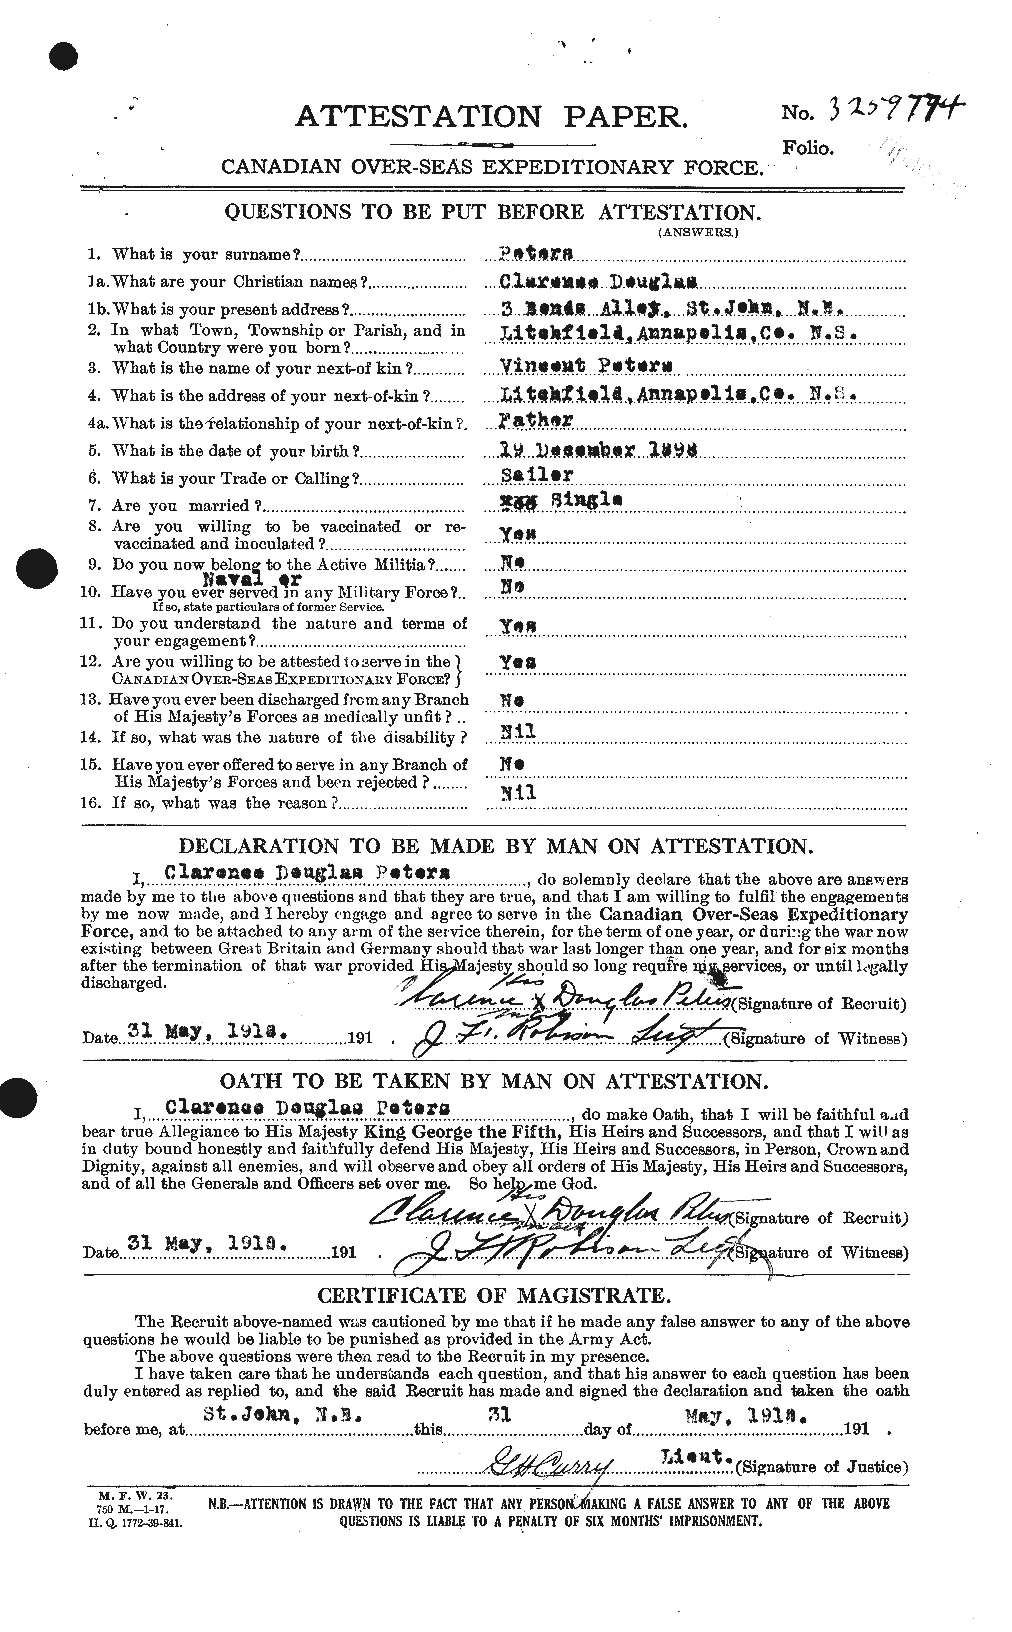 Personnel Records of the First World War - CEF 575375a